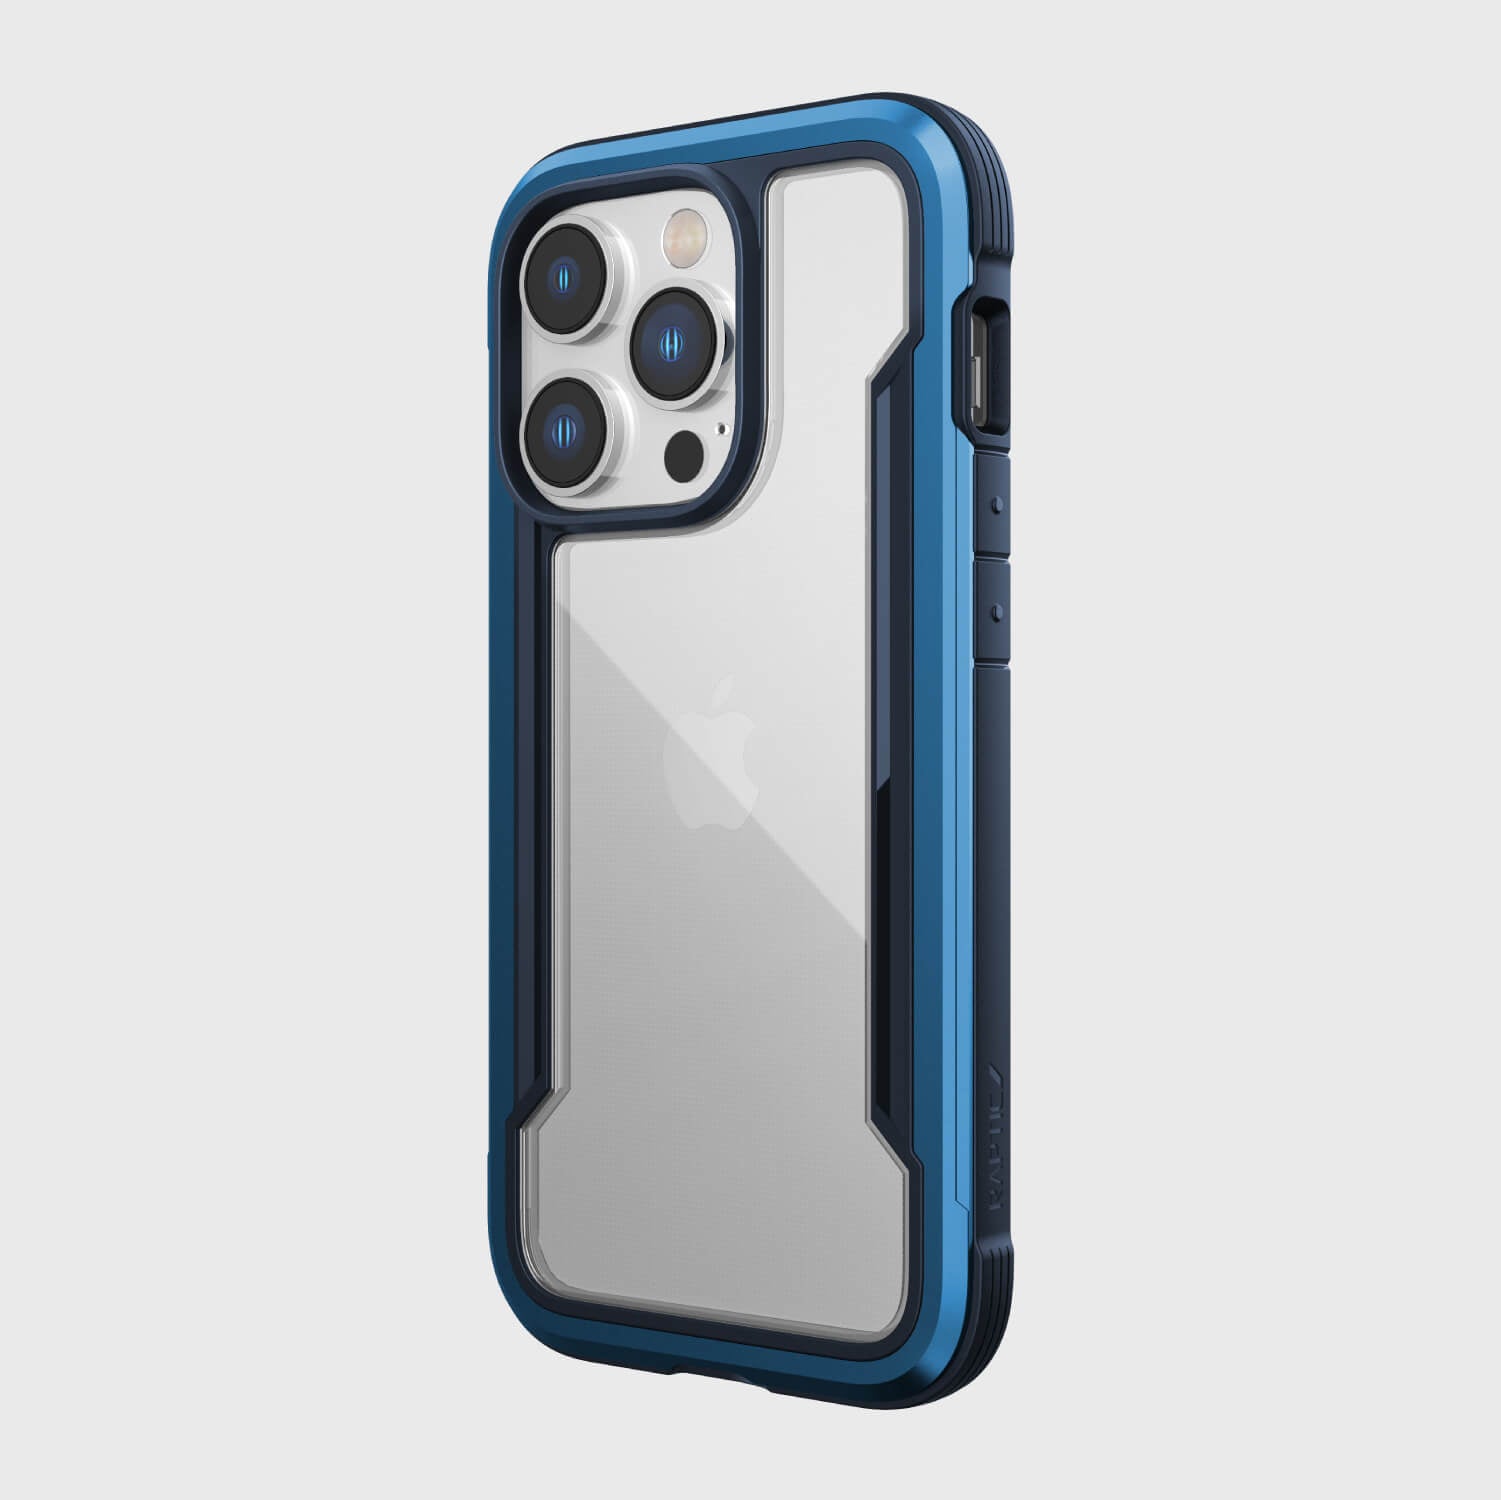 The back view of the Raptic iPhone 14 Pro Case - Shield in blue with MagSafe charger compatibility and screen protection.